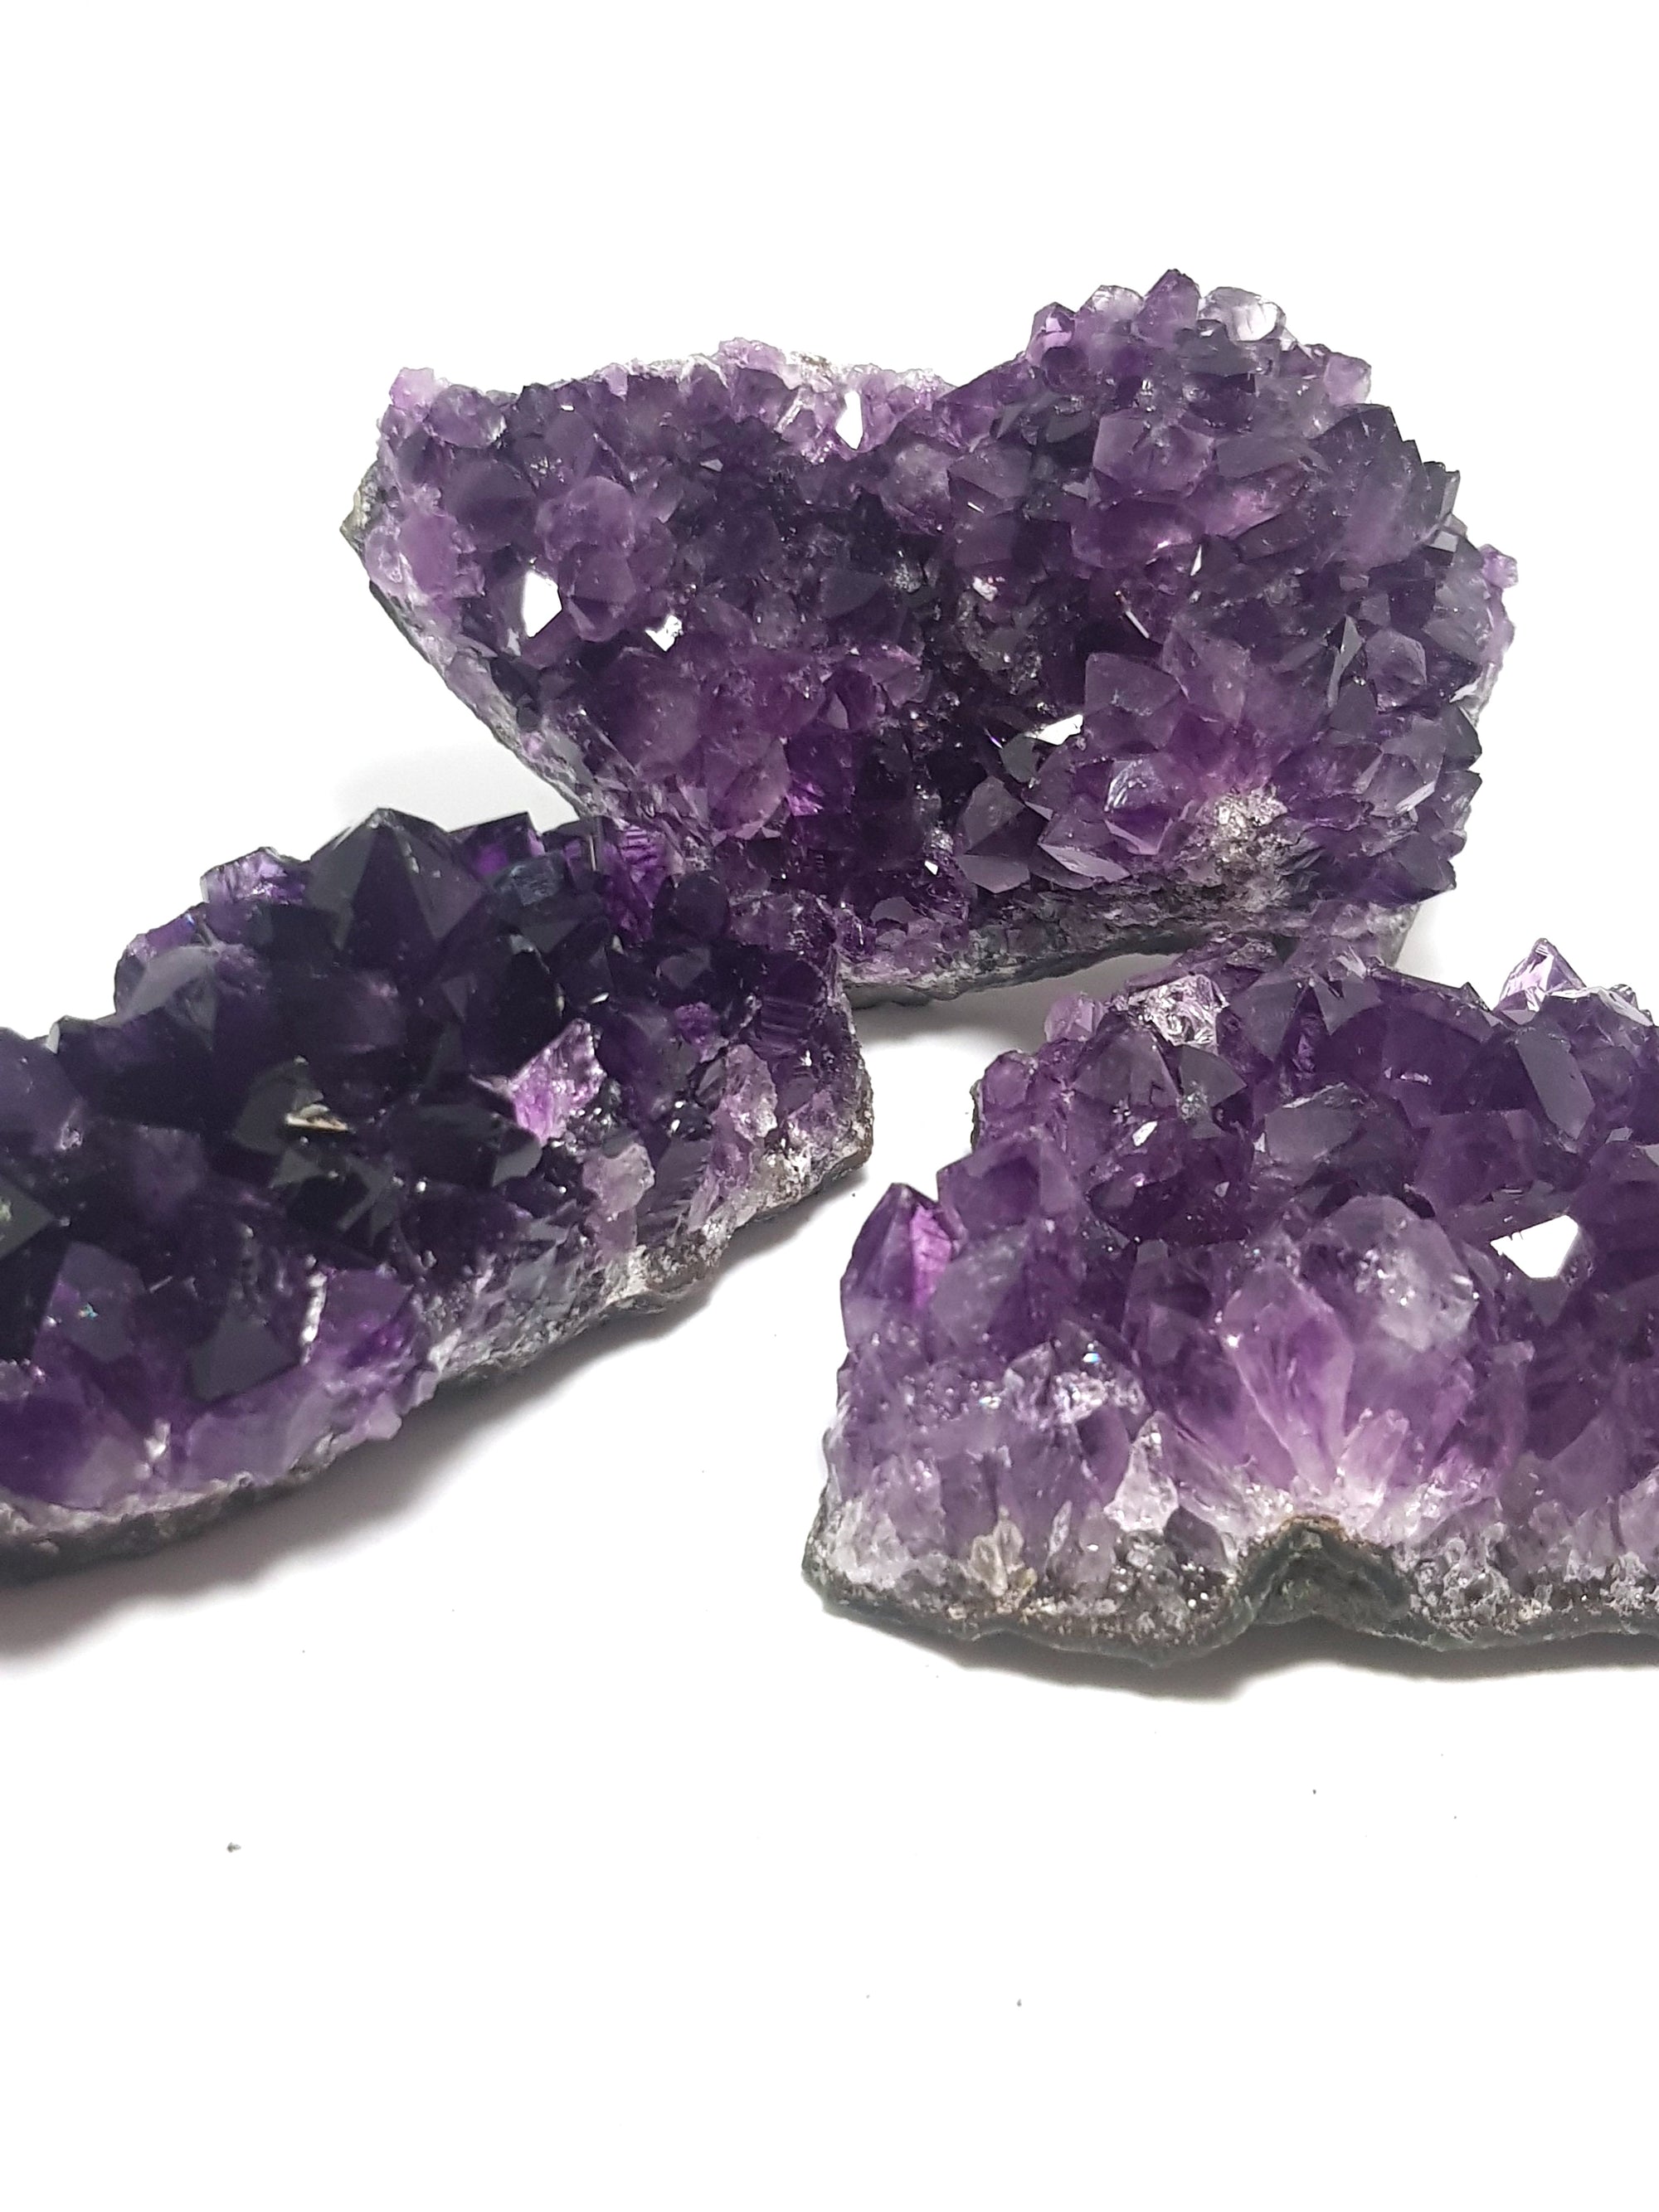 three pieces of a grade druzy amethyst from brazil. They are a deep purple colour and the crystals are well formed